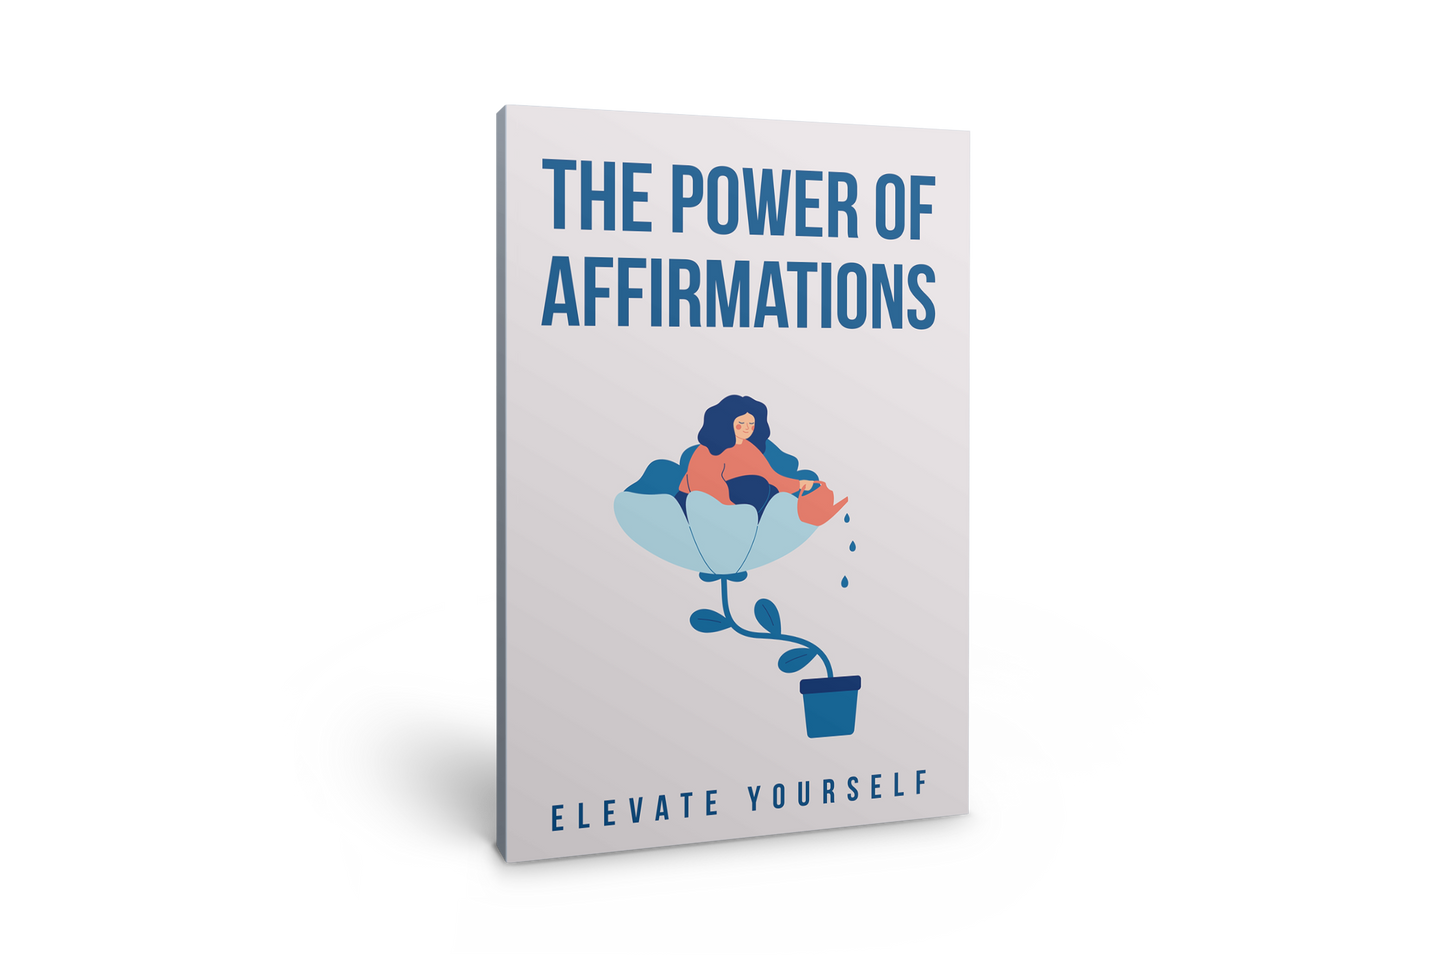 THE POWER OF AFFIRMATIONS